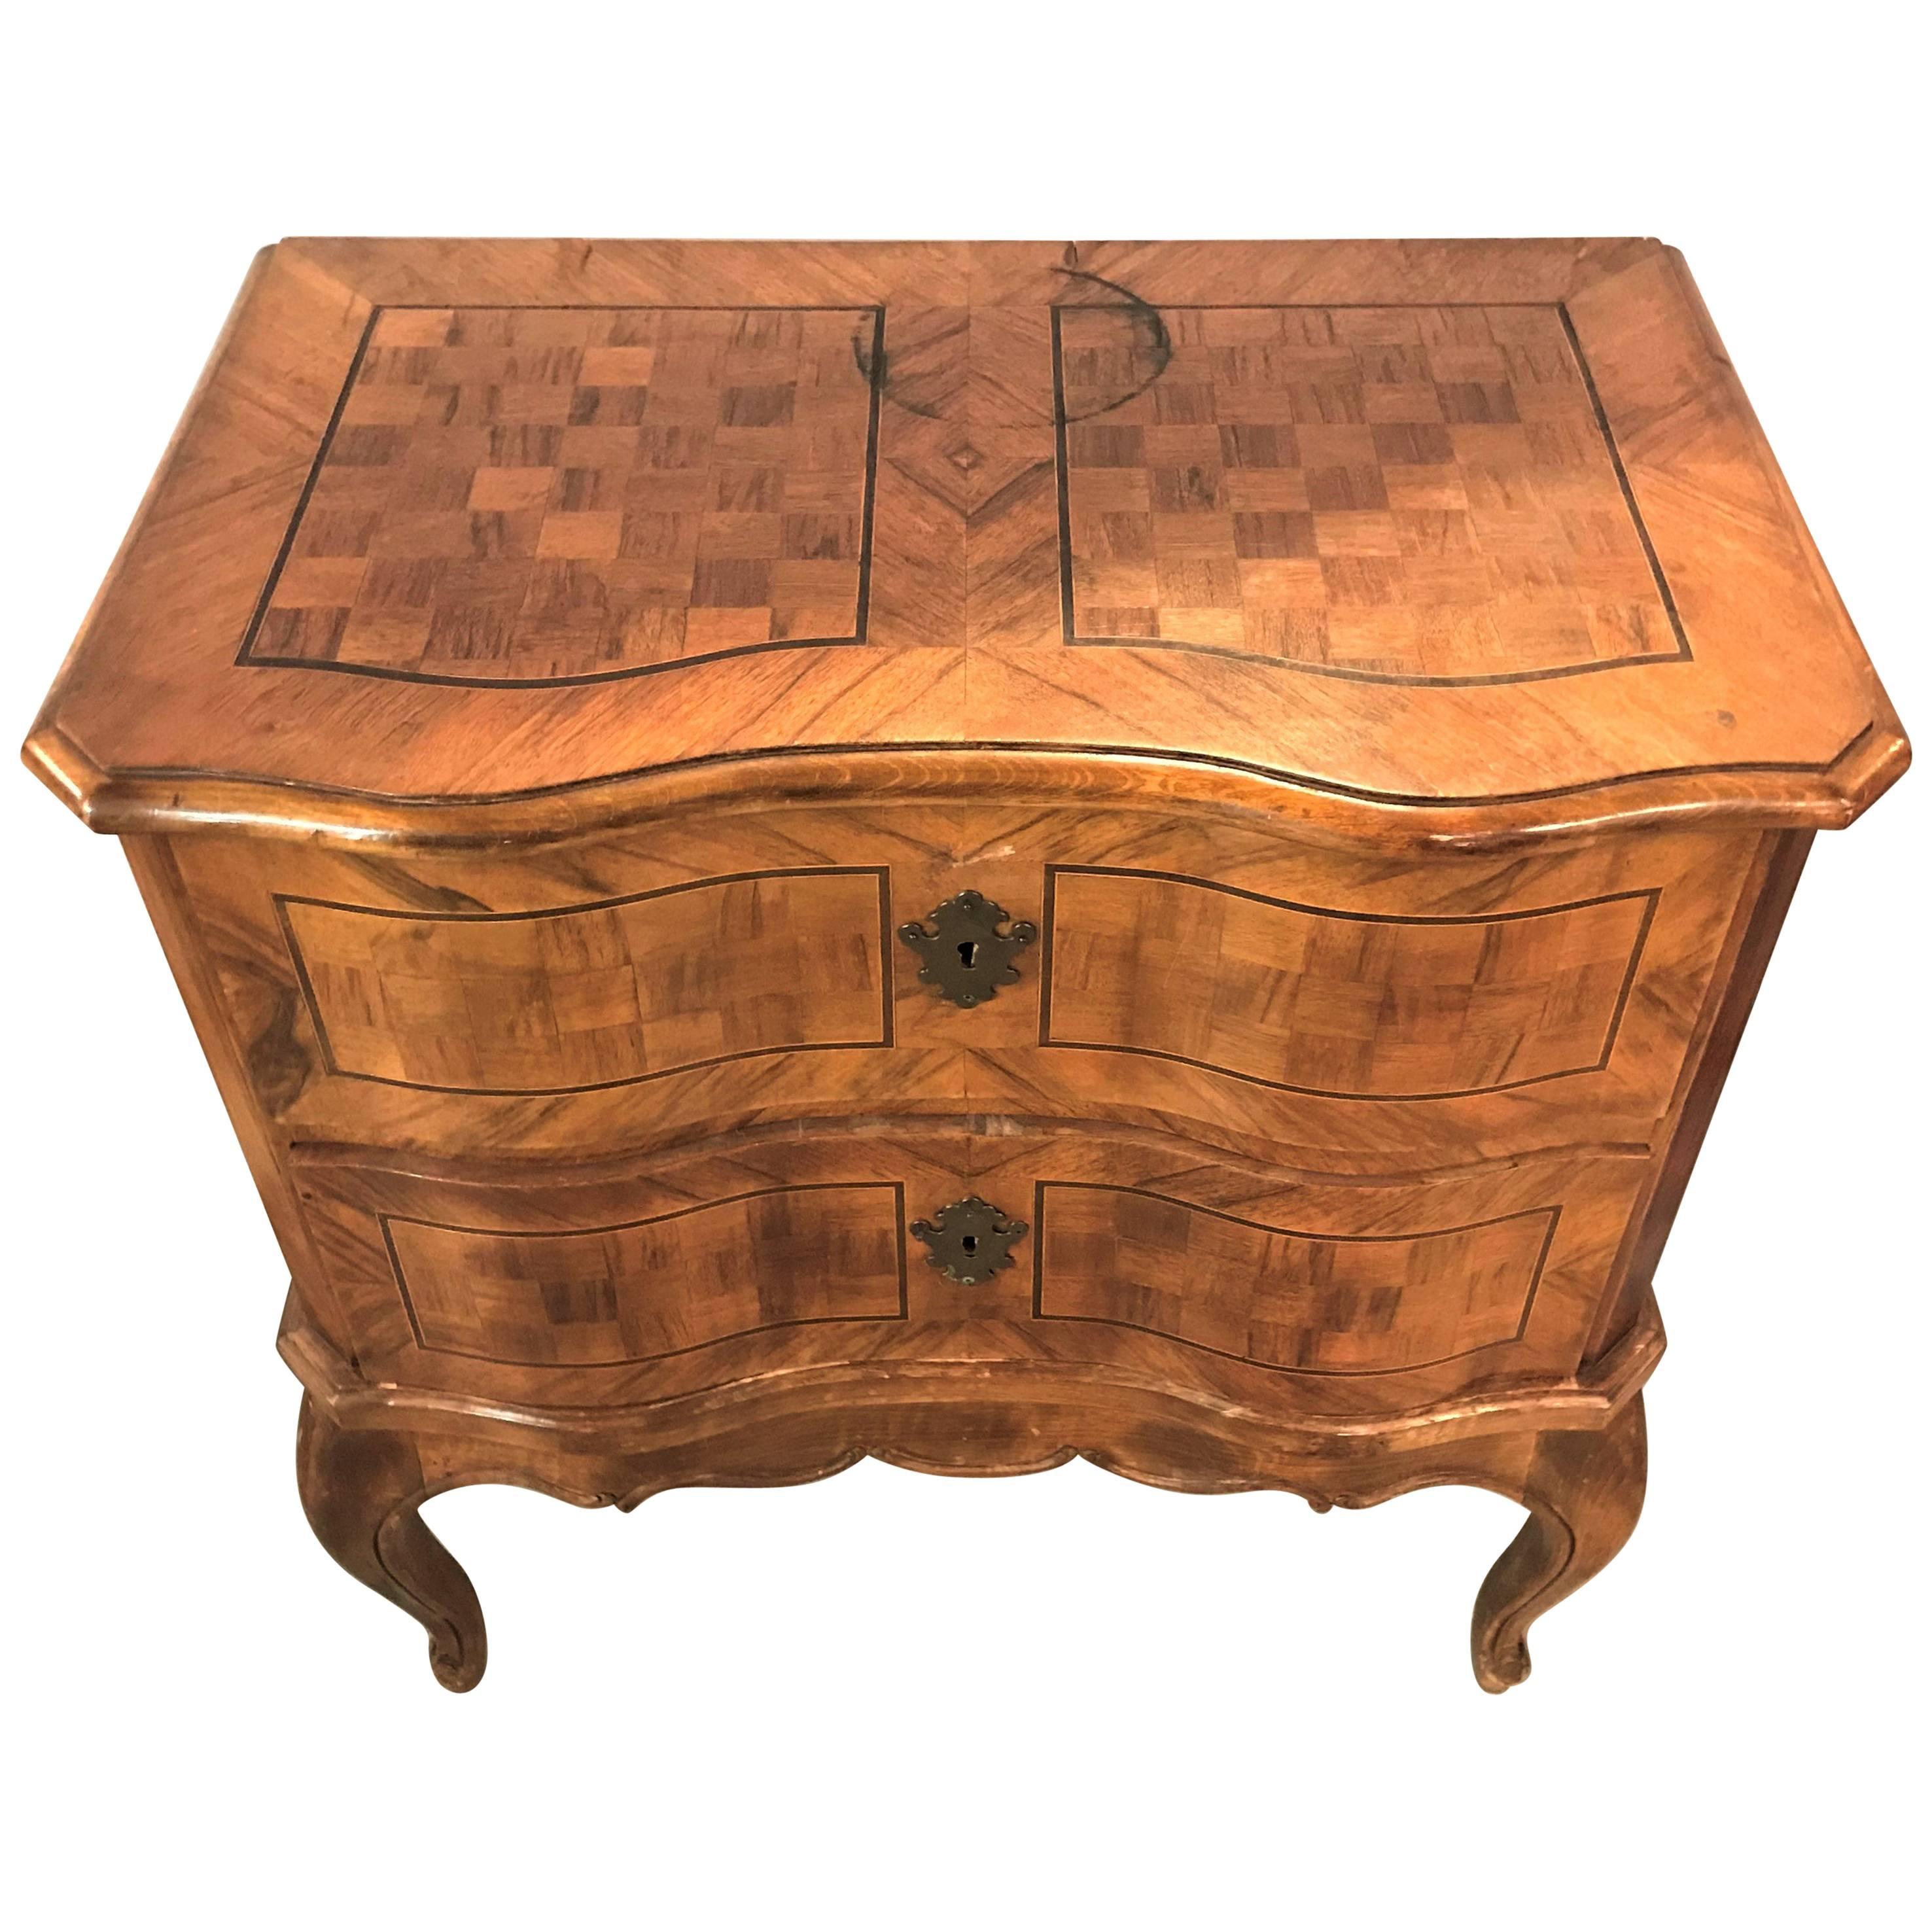 An Italian Ebony and Inlaid Continental Commode / Nightstand, 19th Century